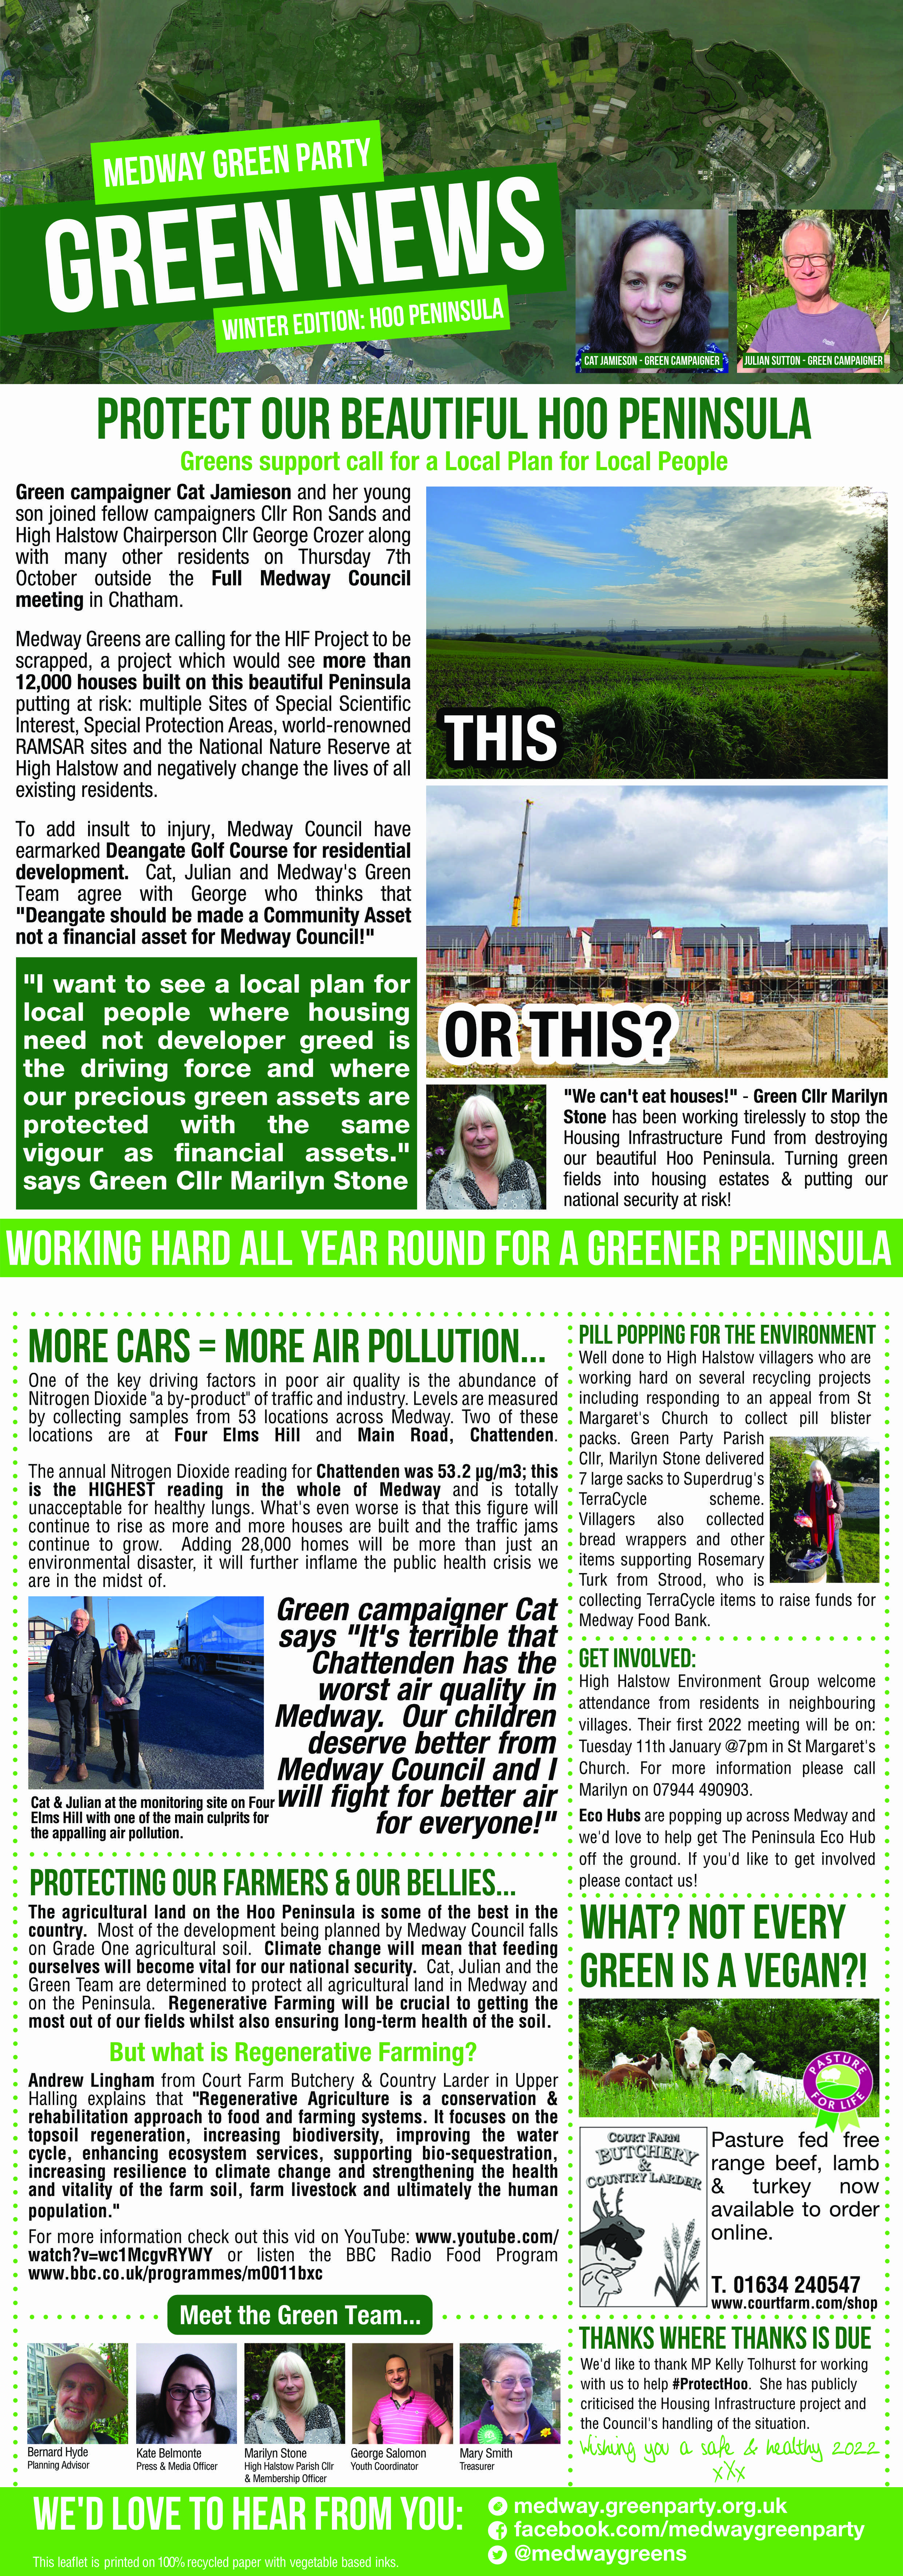 Medway Green Party Winter Newsletter - Accessible link on the main page